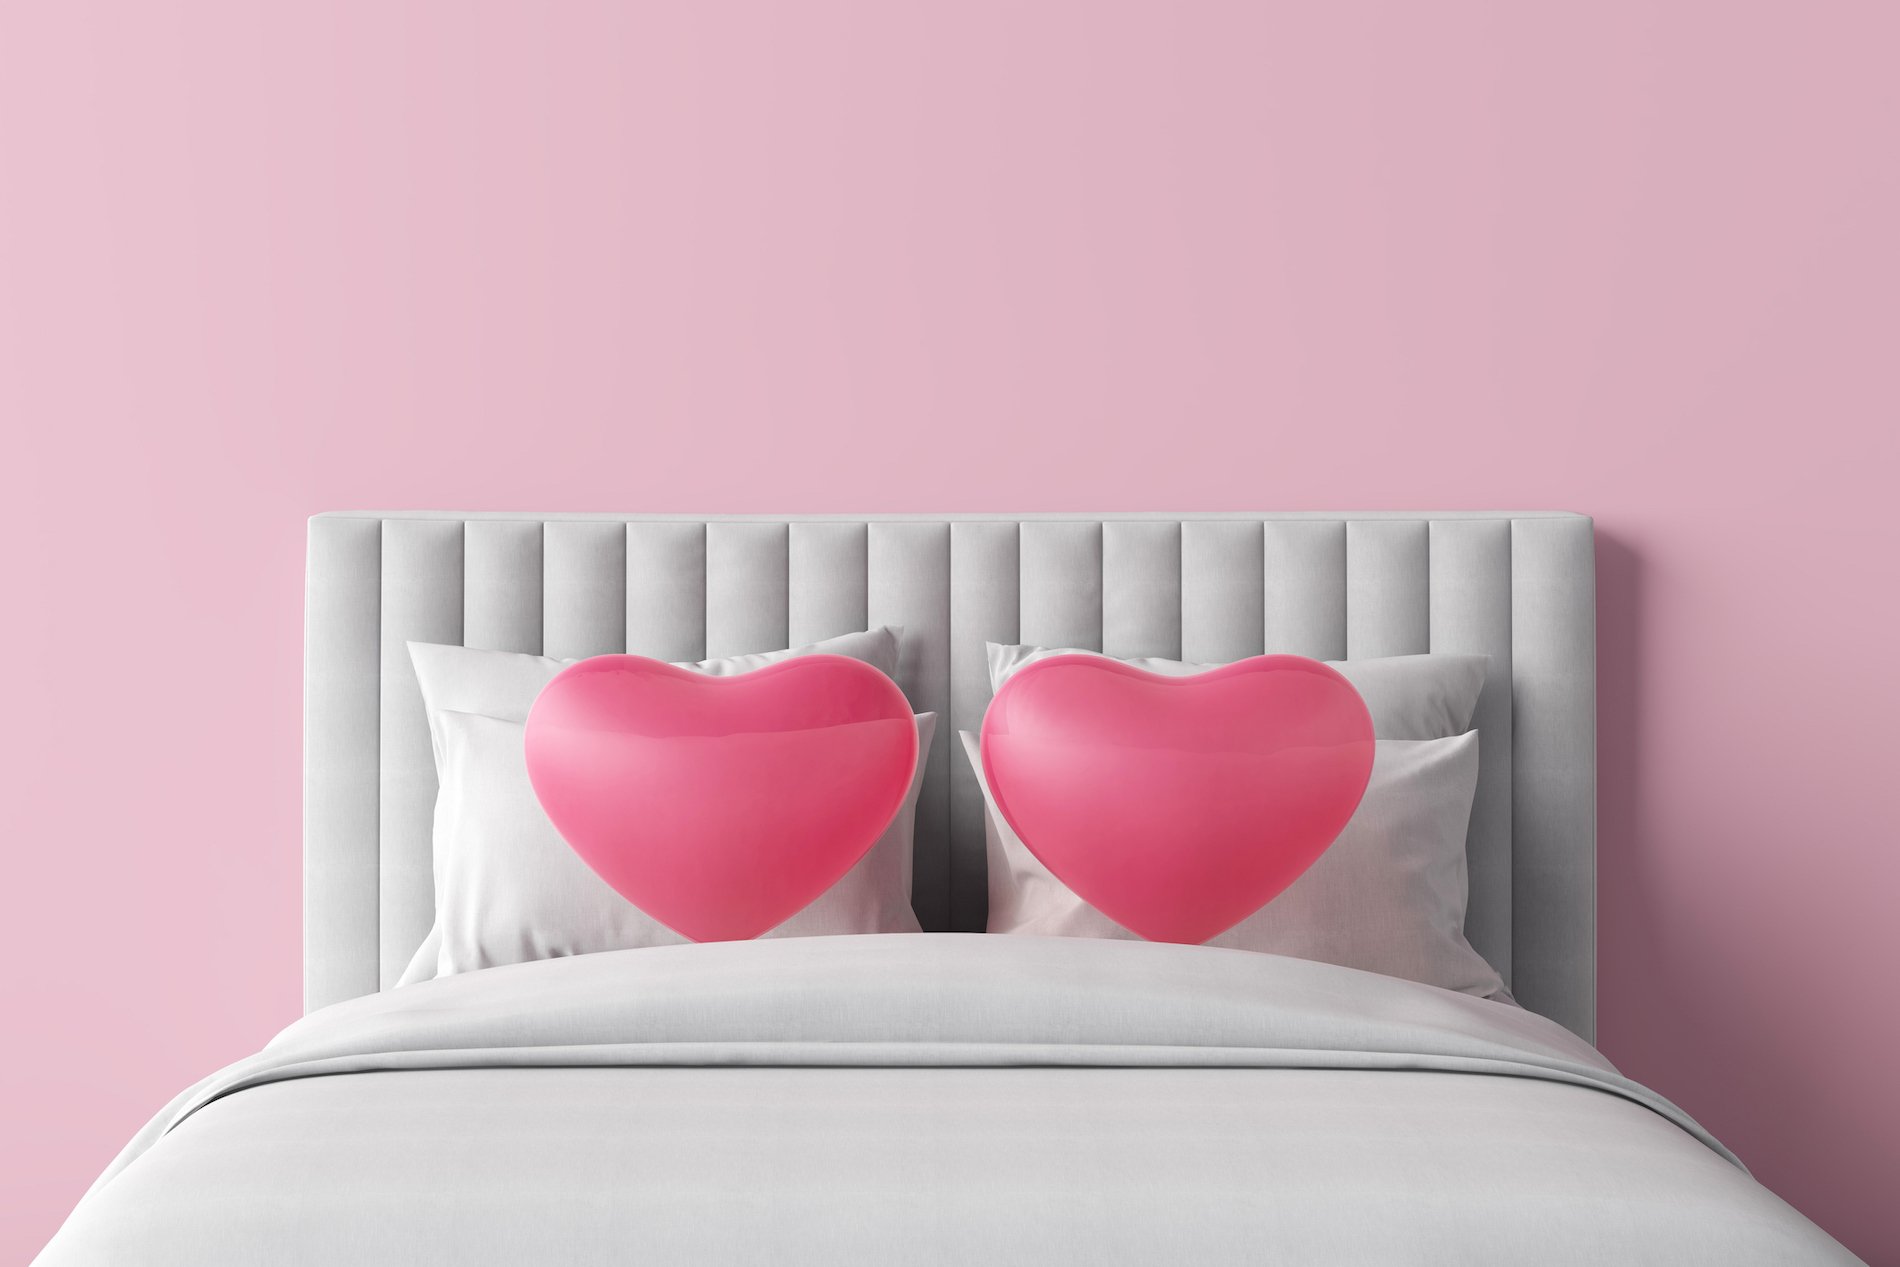 A bed with two heart shaped pink pillows, against a pink wall. 